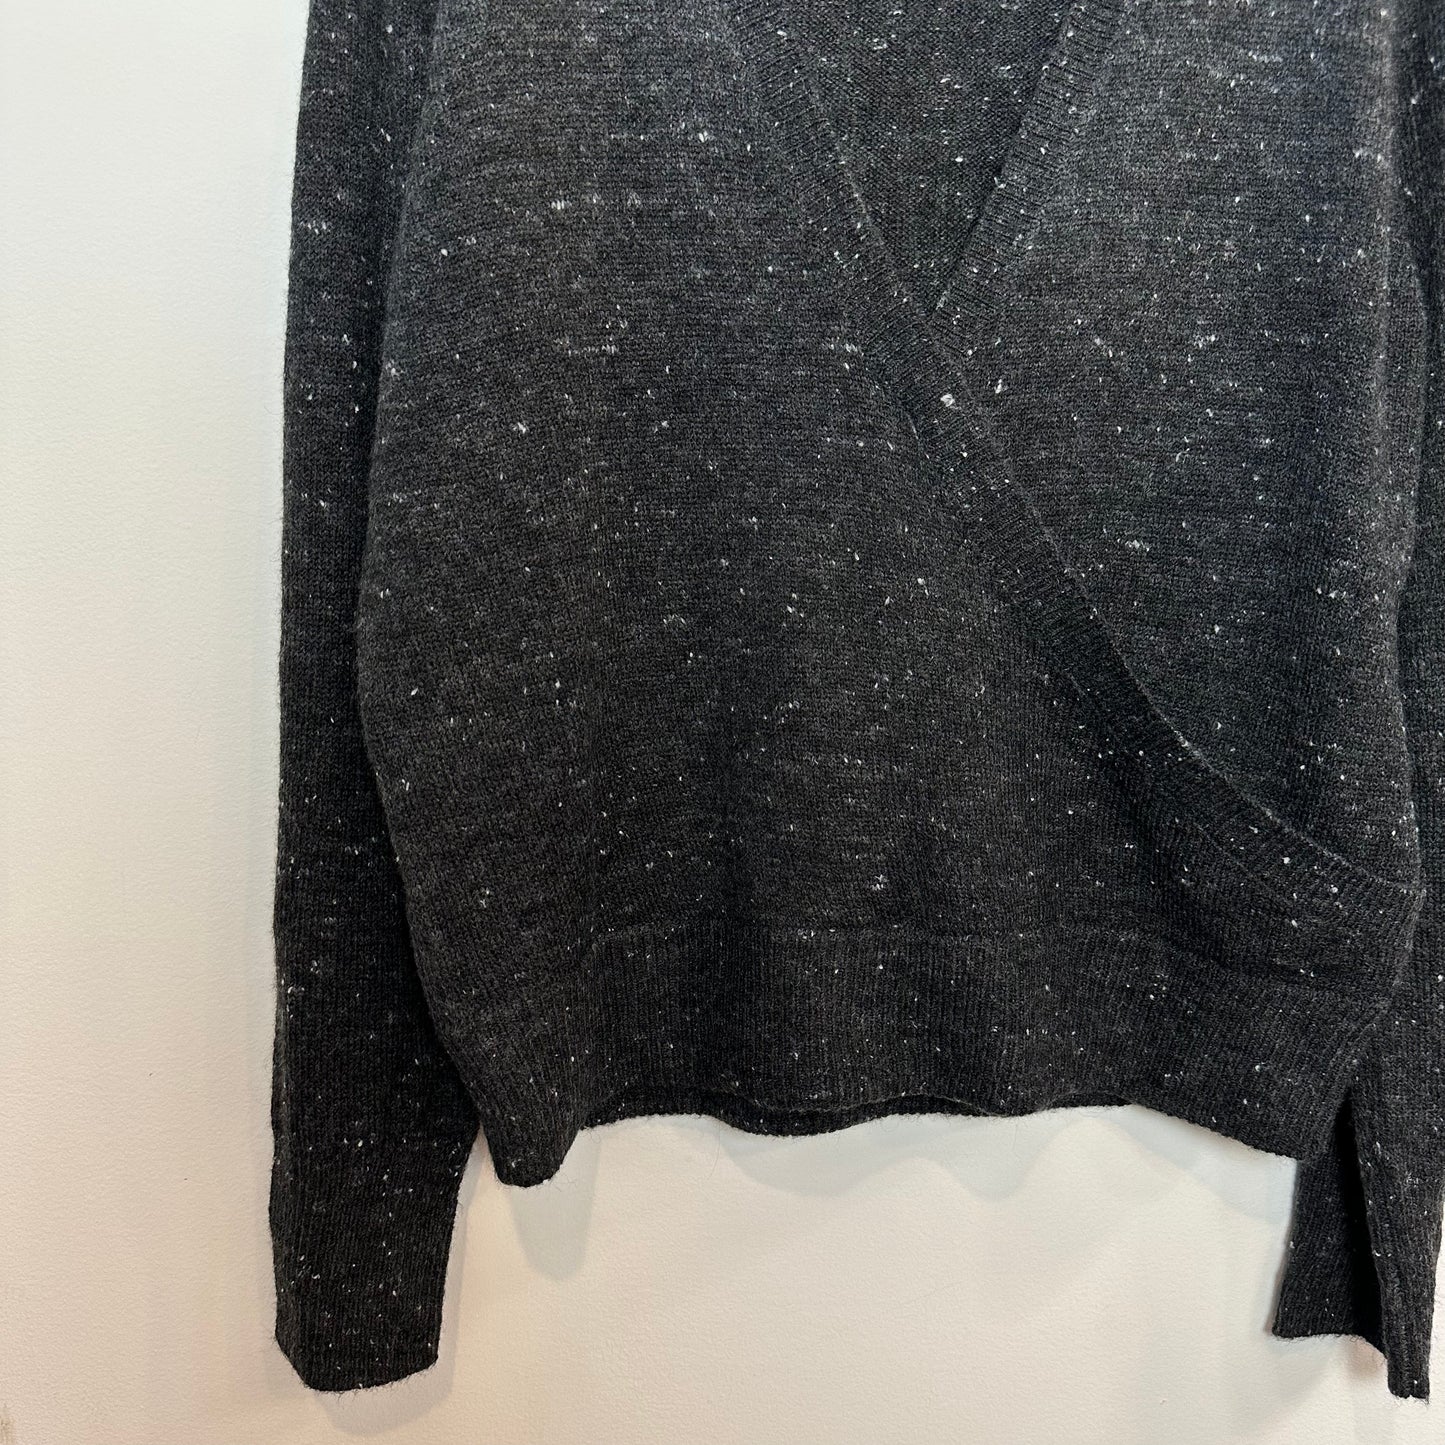 Madewell Donegal Wrap Front Pullover Sweater in Coziest Yarn Charcoal Gray Large